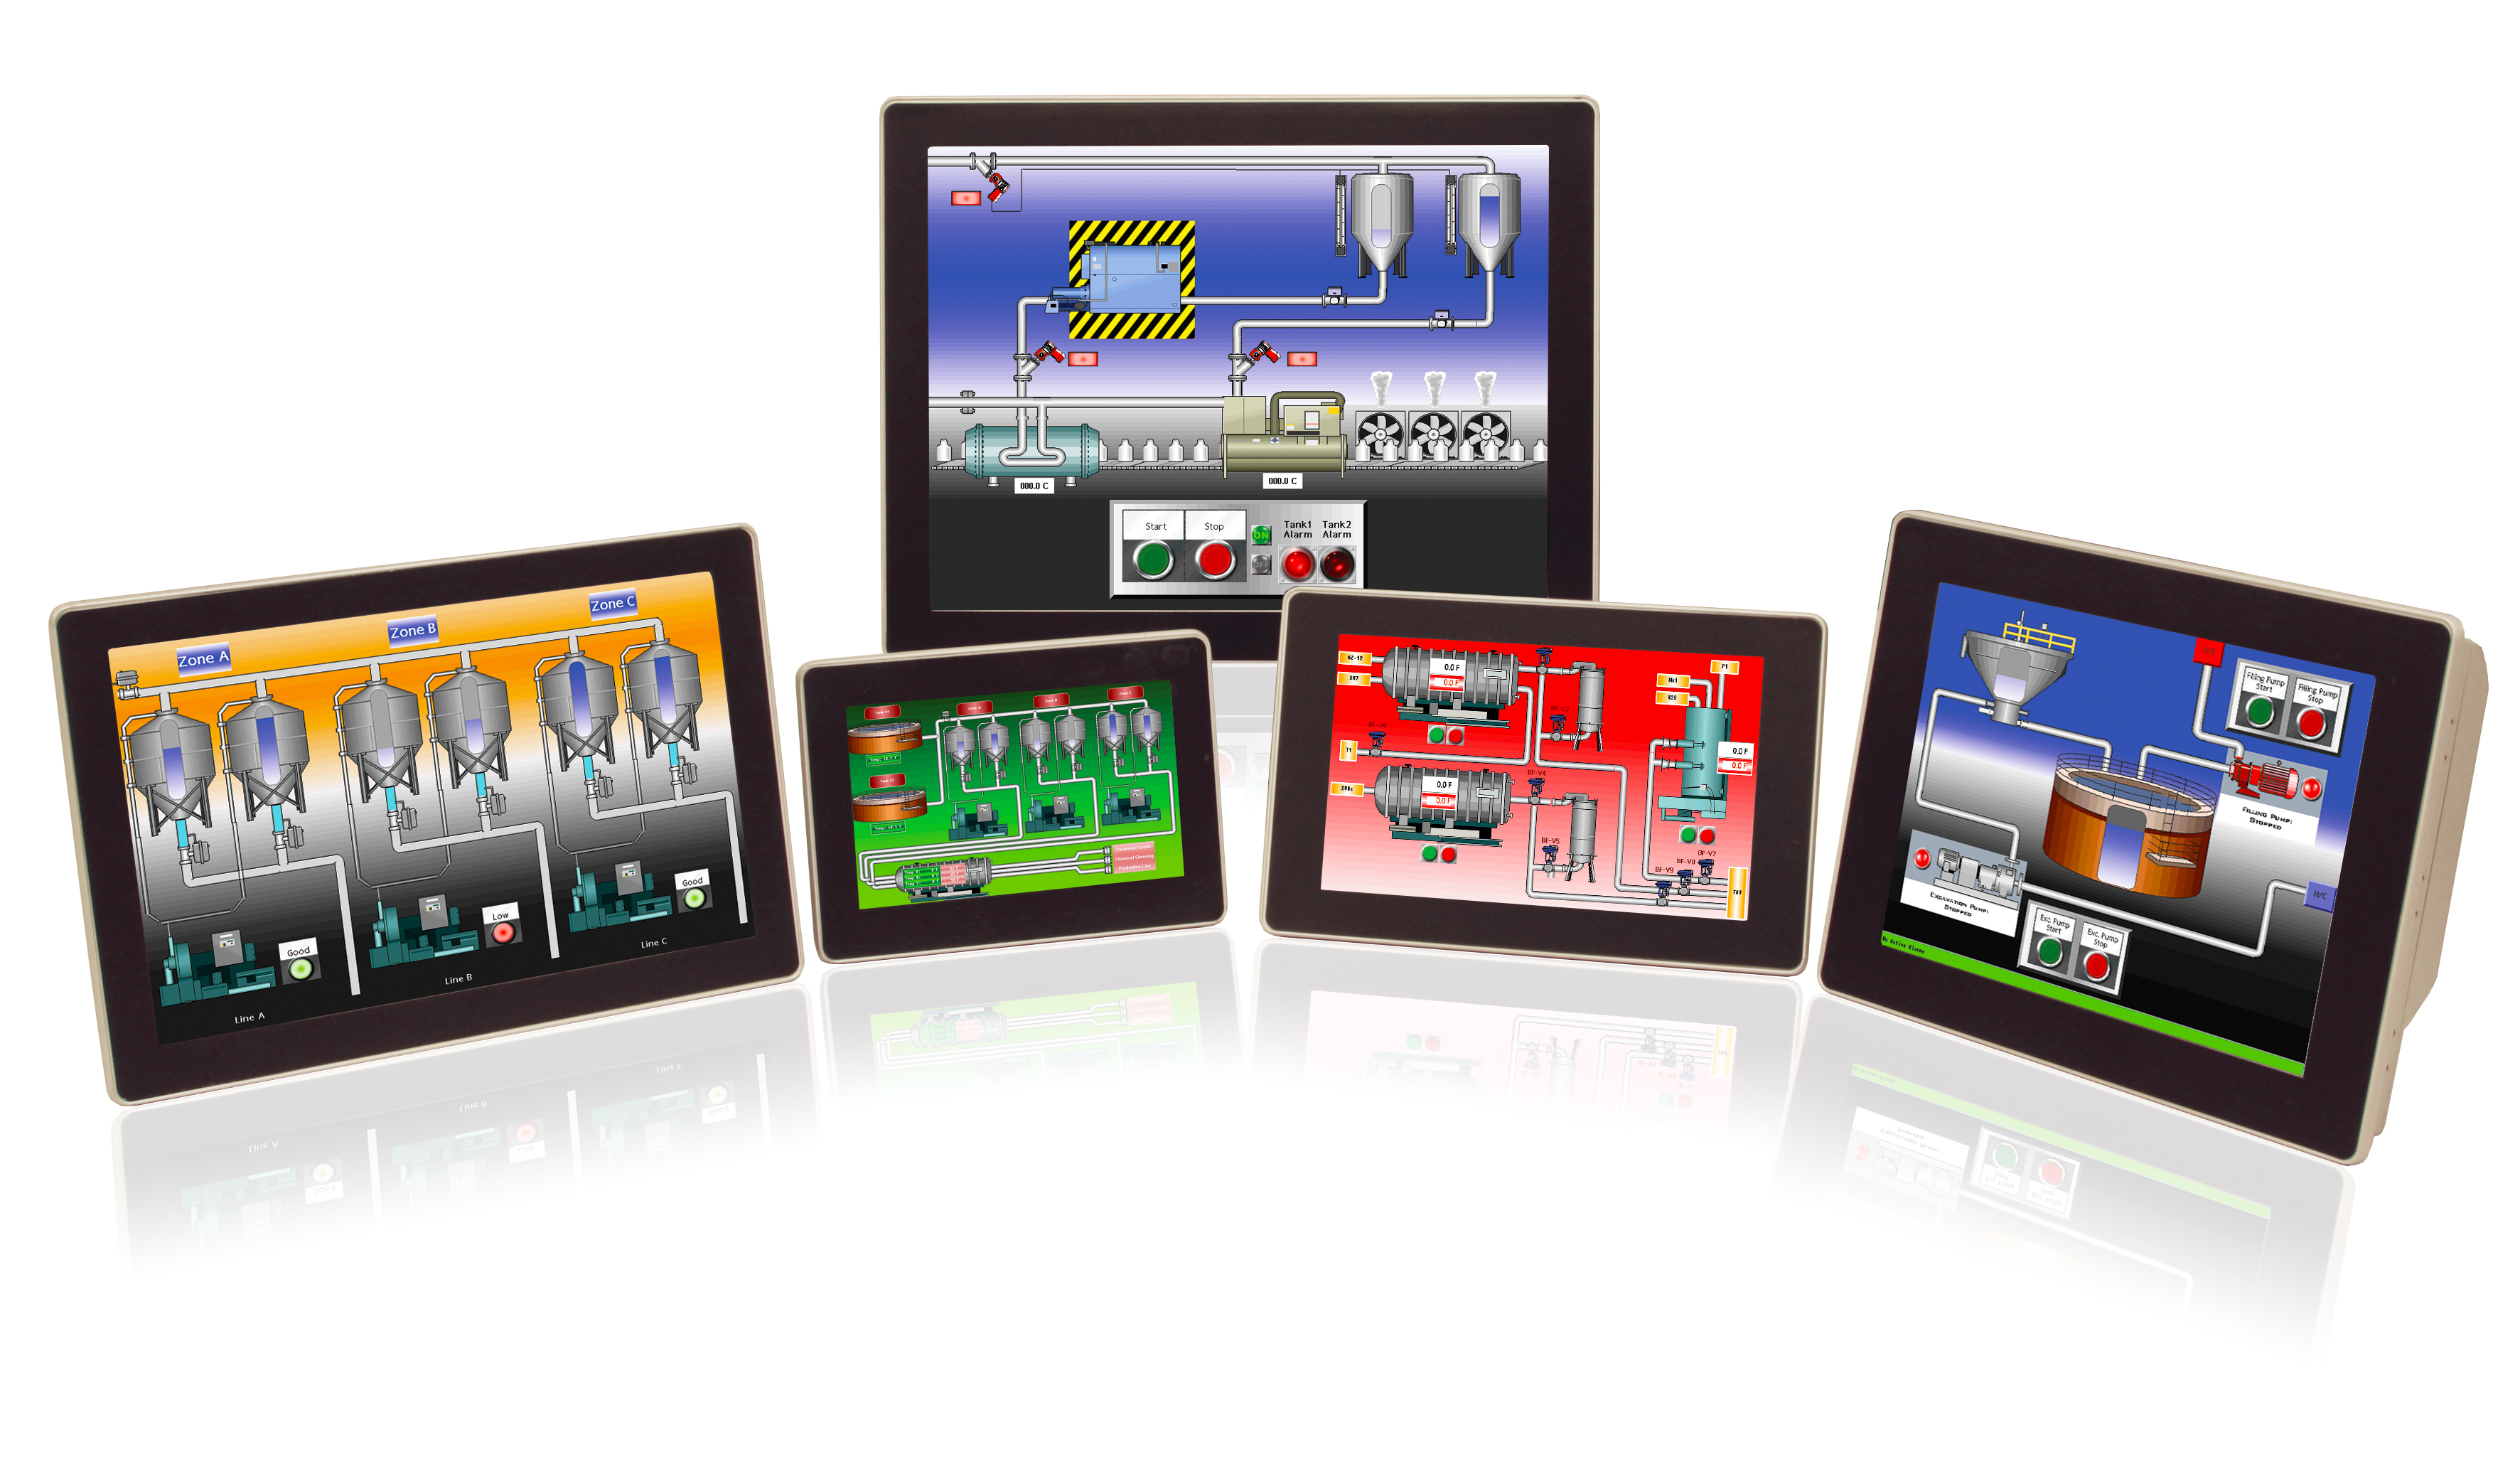 Automation: New HMIs Are Rugged with Modular Expansion and Protocol Conversion